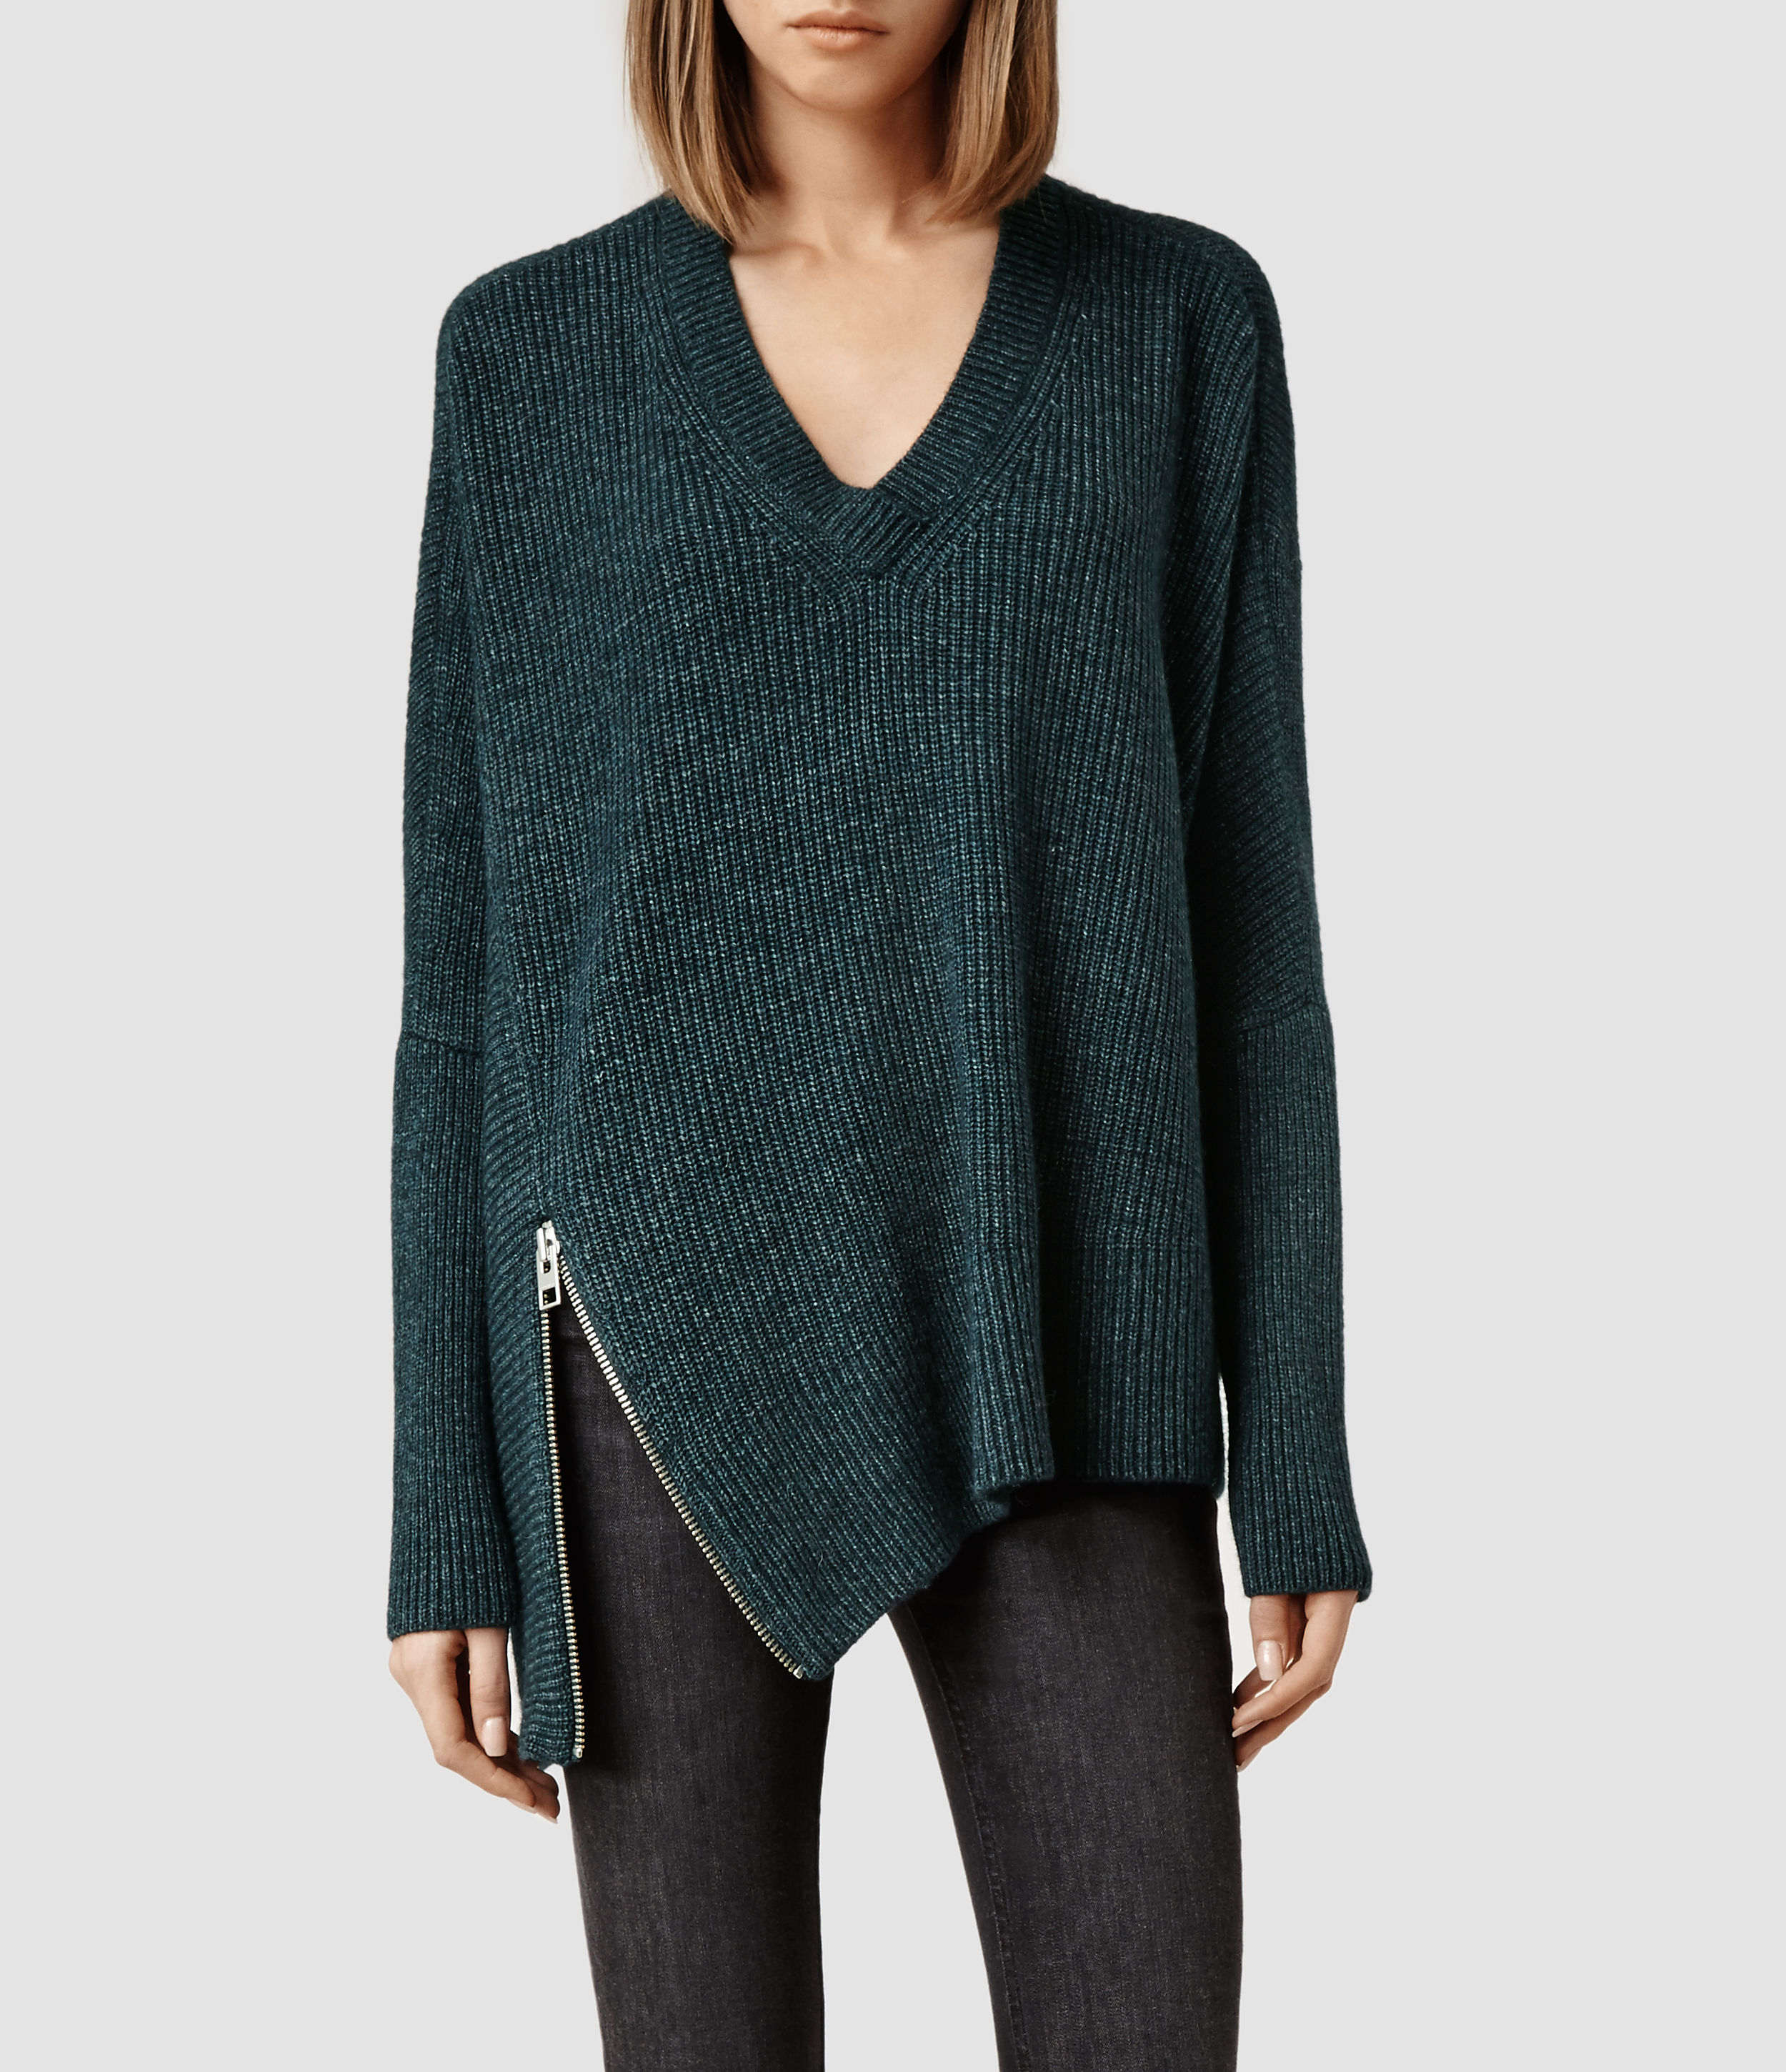 AllSaints Able Zip Sweater in Forest Marl (Green) - Lyst